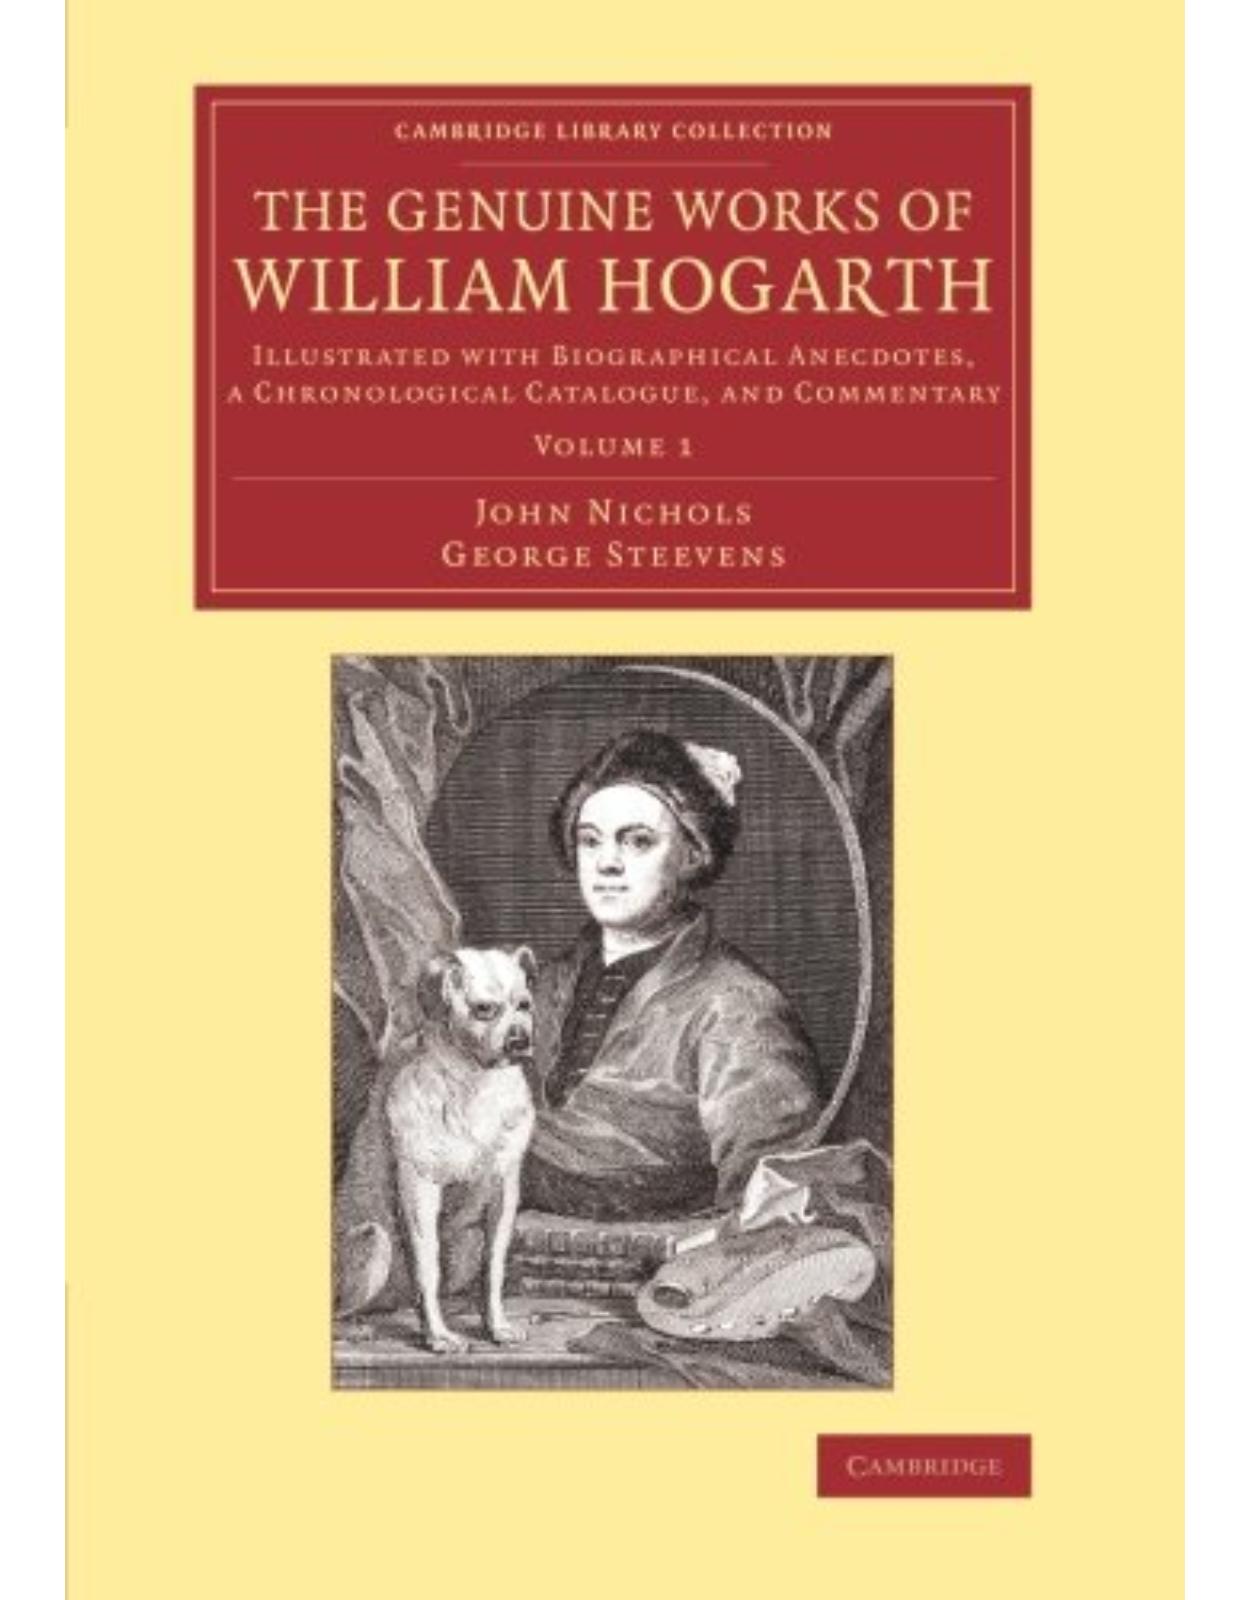 The Genuine Works of William Hogarth: Illustrated with Biographical Anecdotes, a Chronological Catalogue, and Commentary: Volume 1 (Cambridge Library Collection - Art and Architecture)